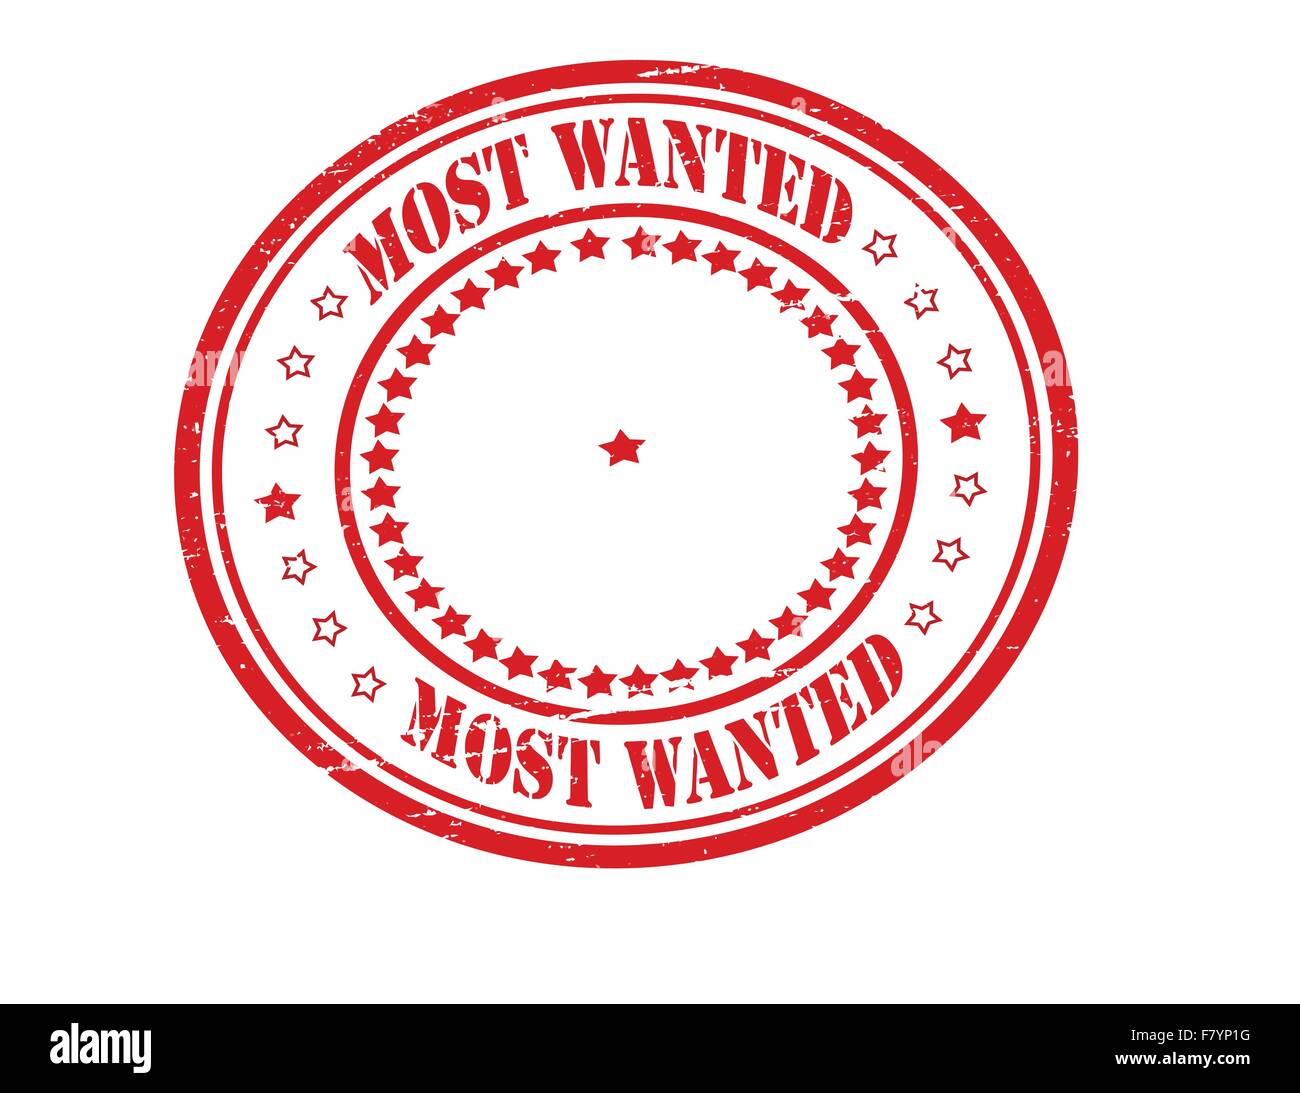 Most wanted Stock Vector